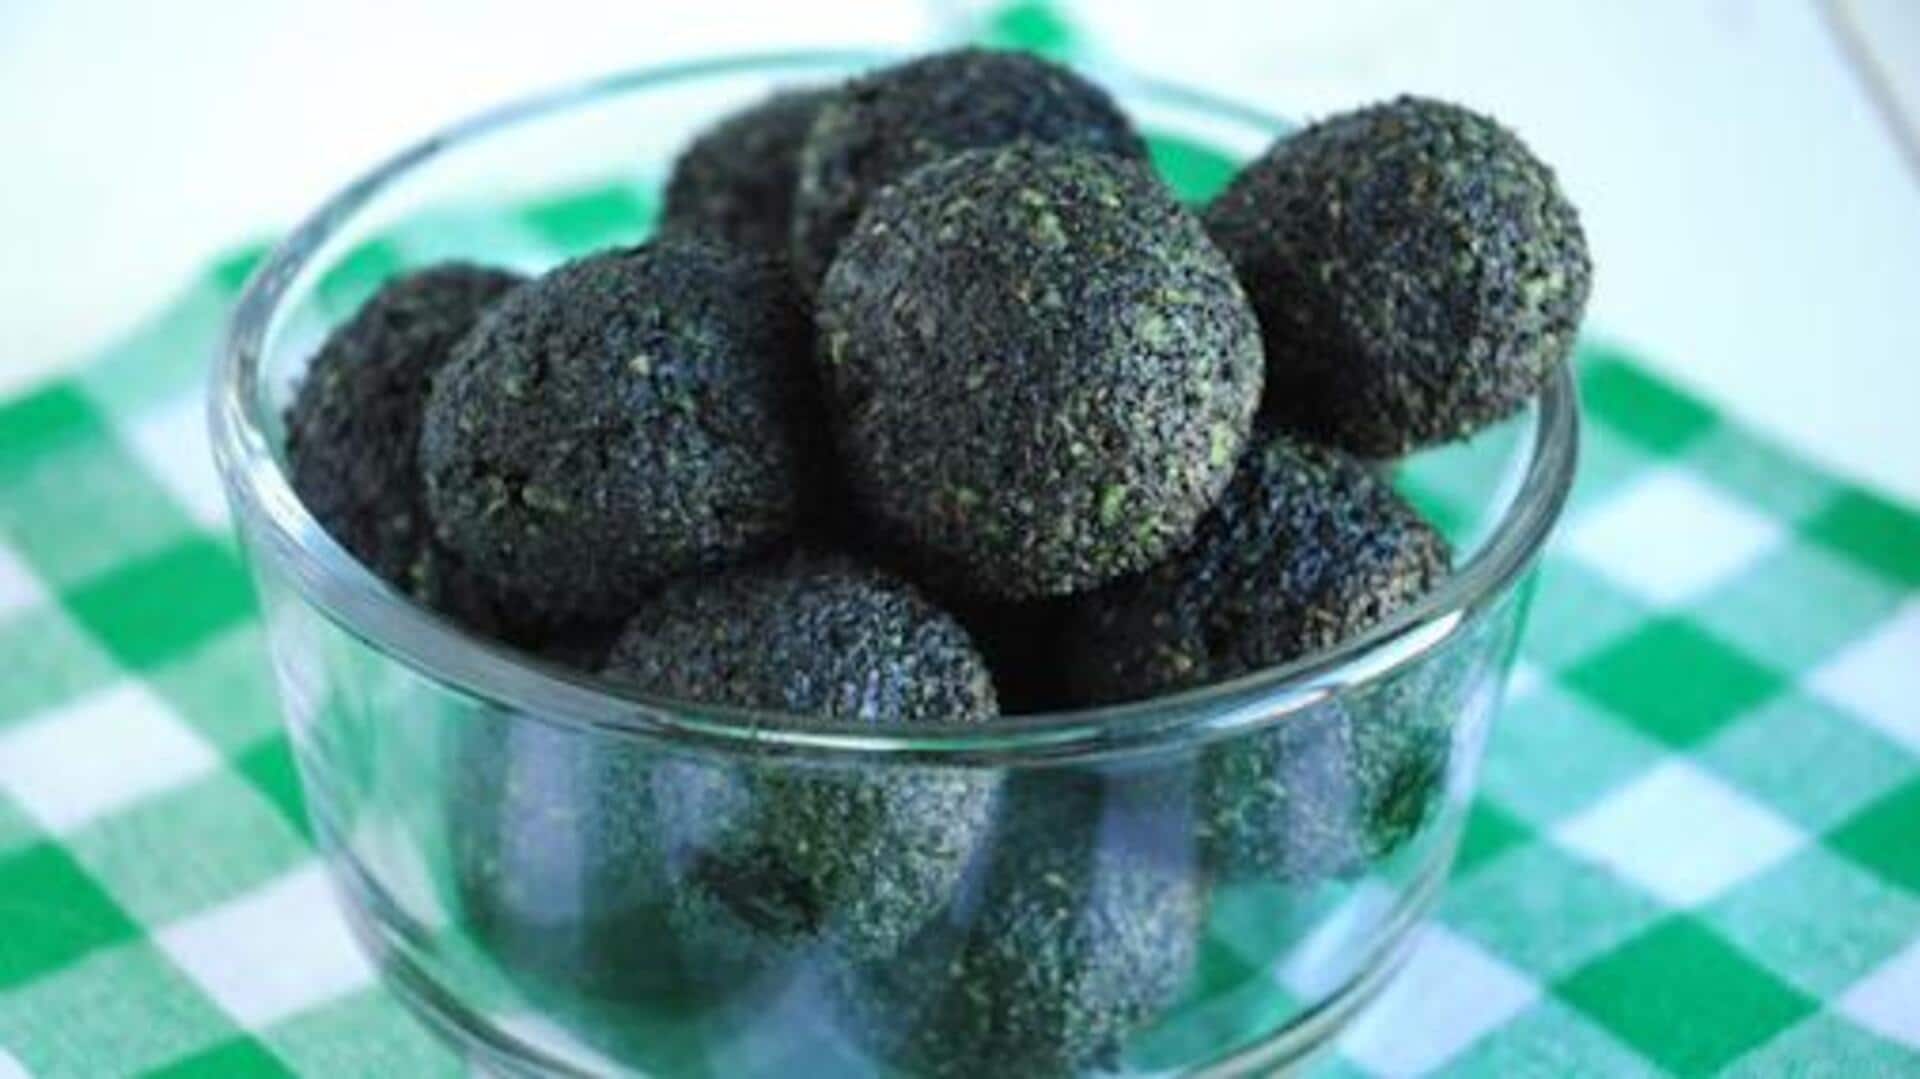 Power up with these tempting spirulina snacks